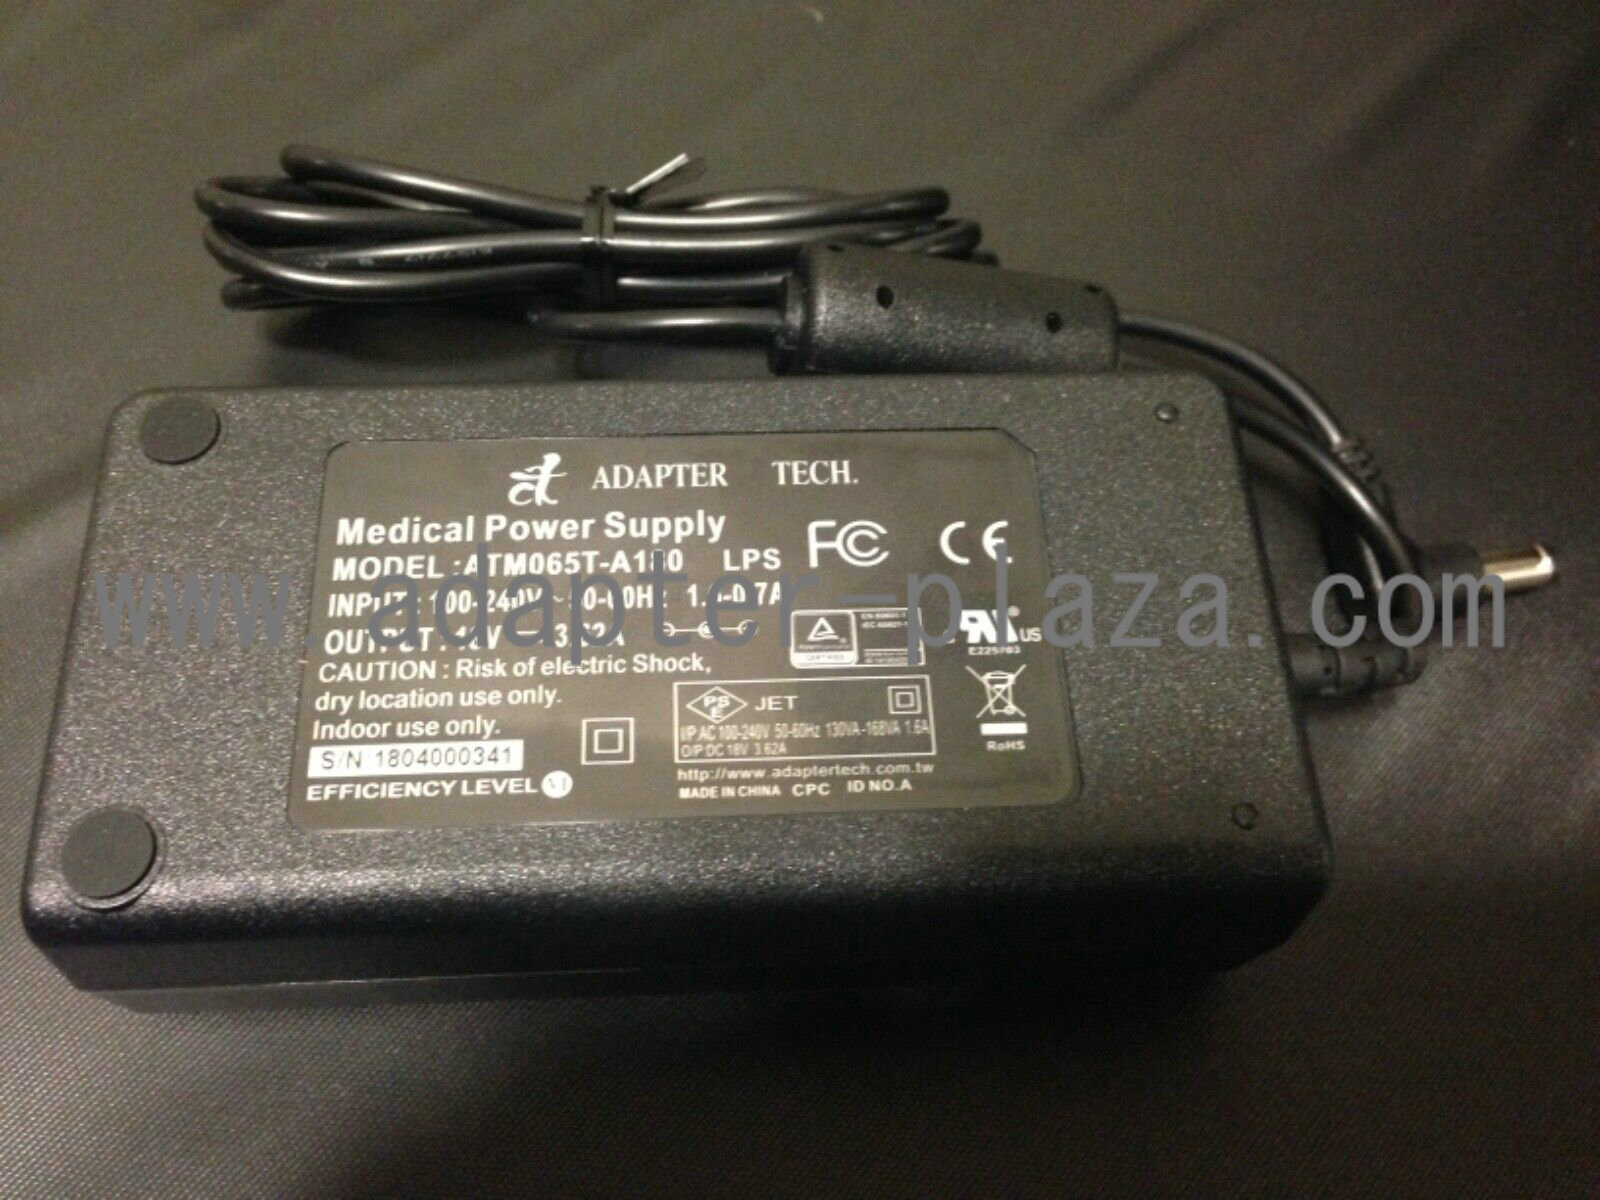 New JET Tech ATM065T-A180 18V 3.62A Medical Power Supply Adapter